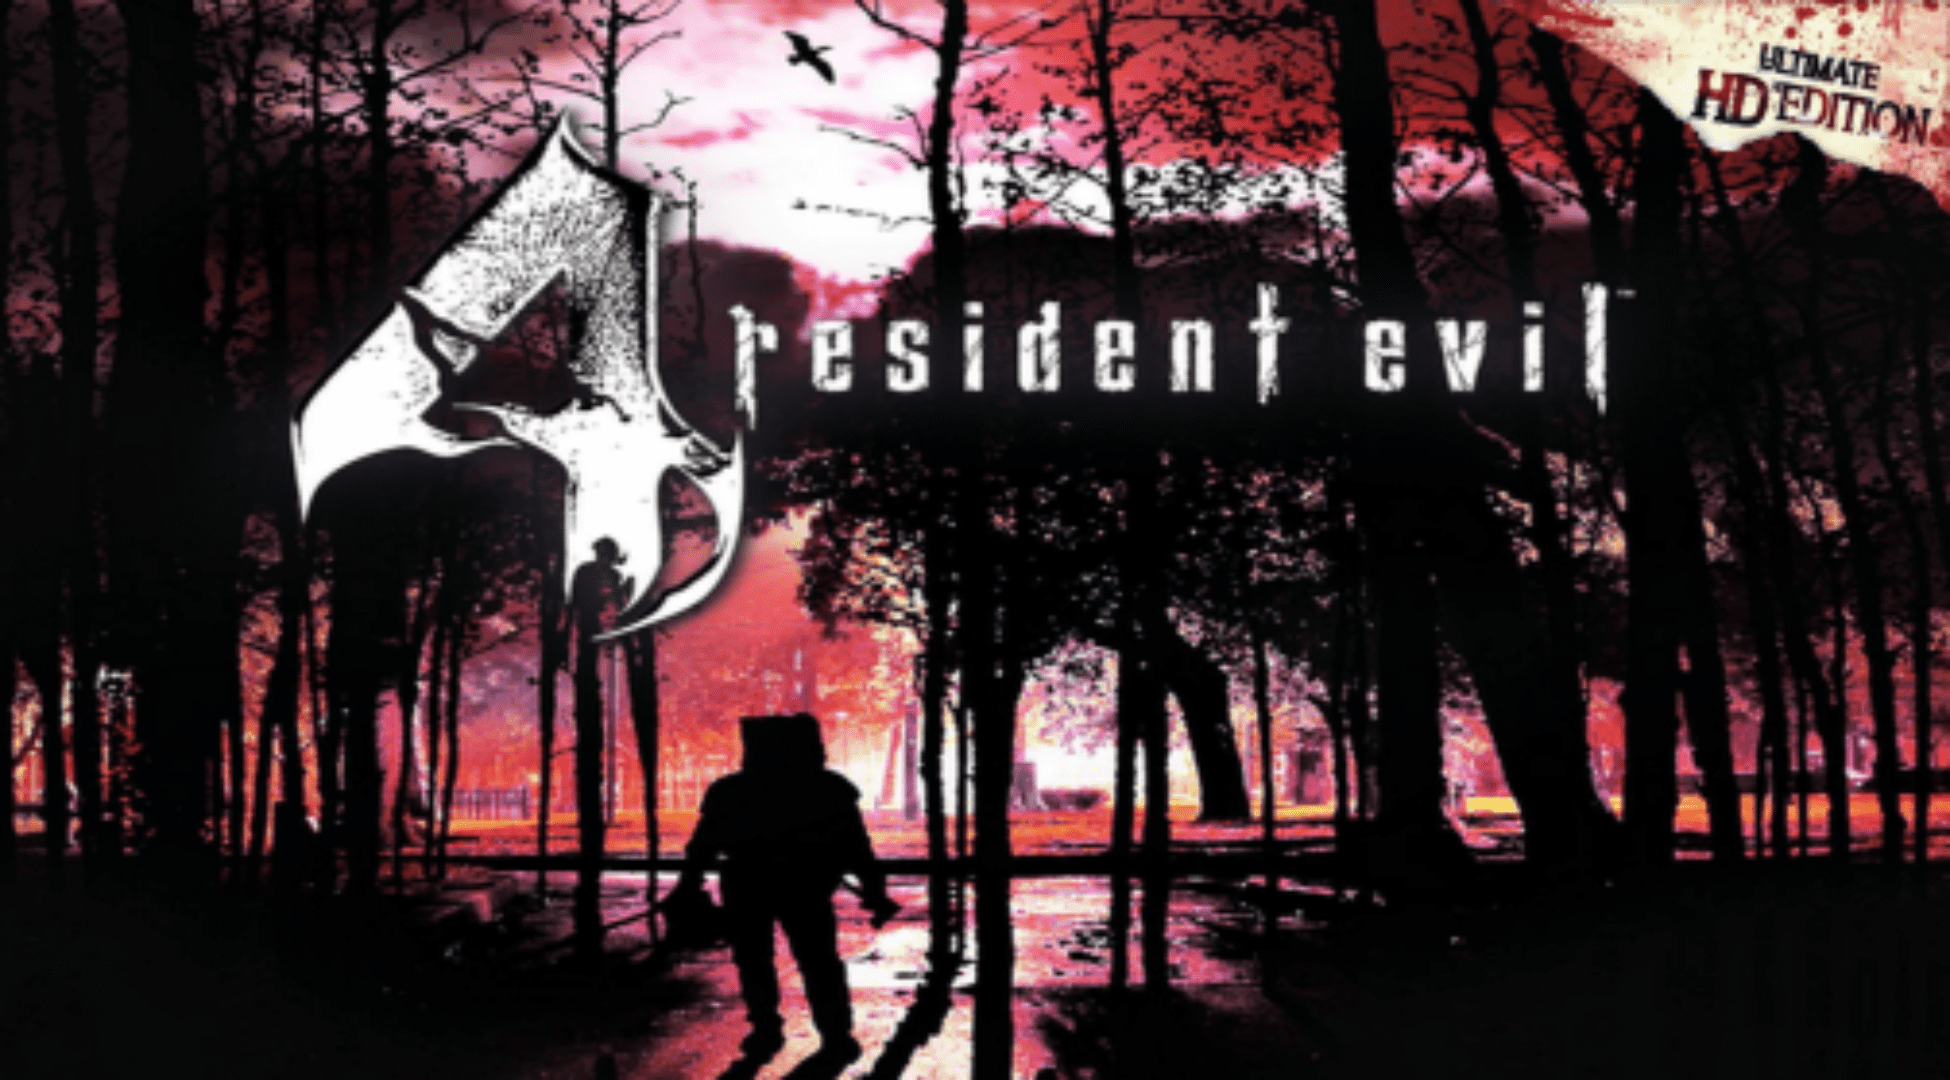 Resident Evil 4 HD (PC) Giveaway